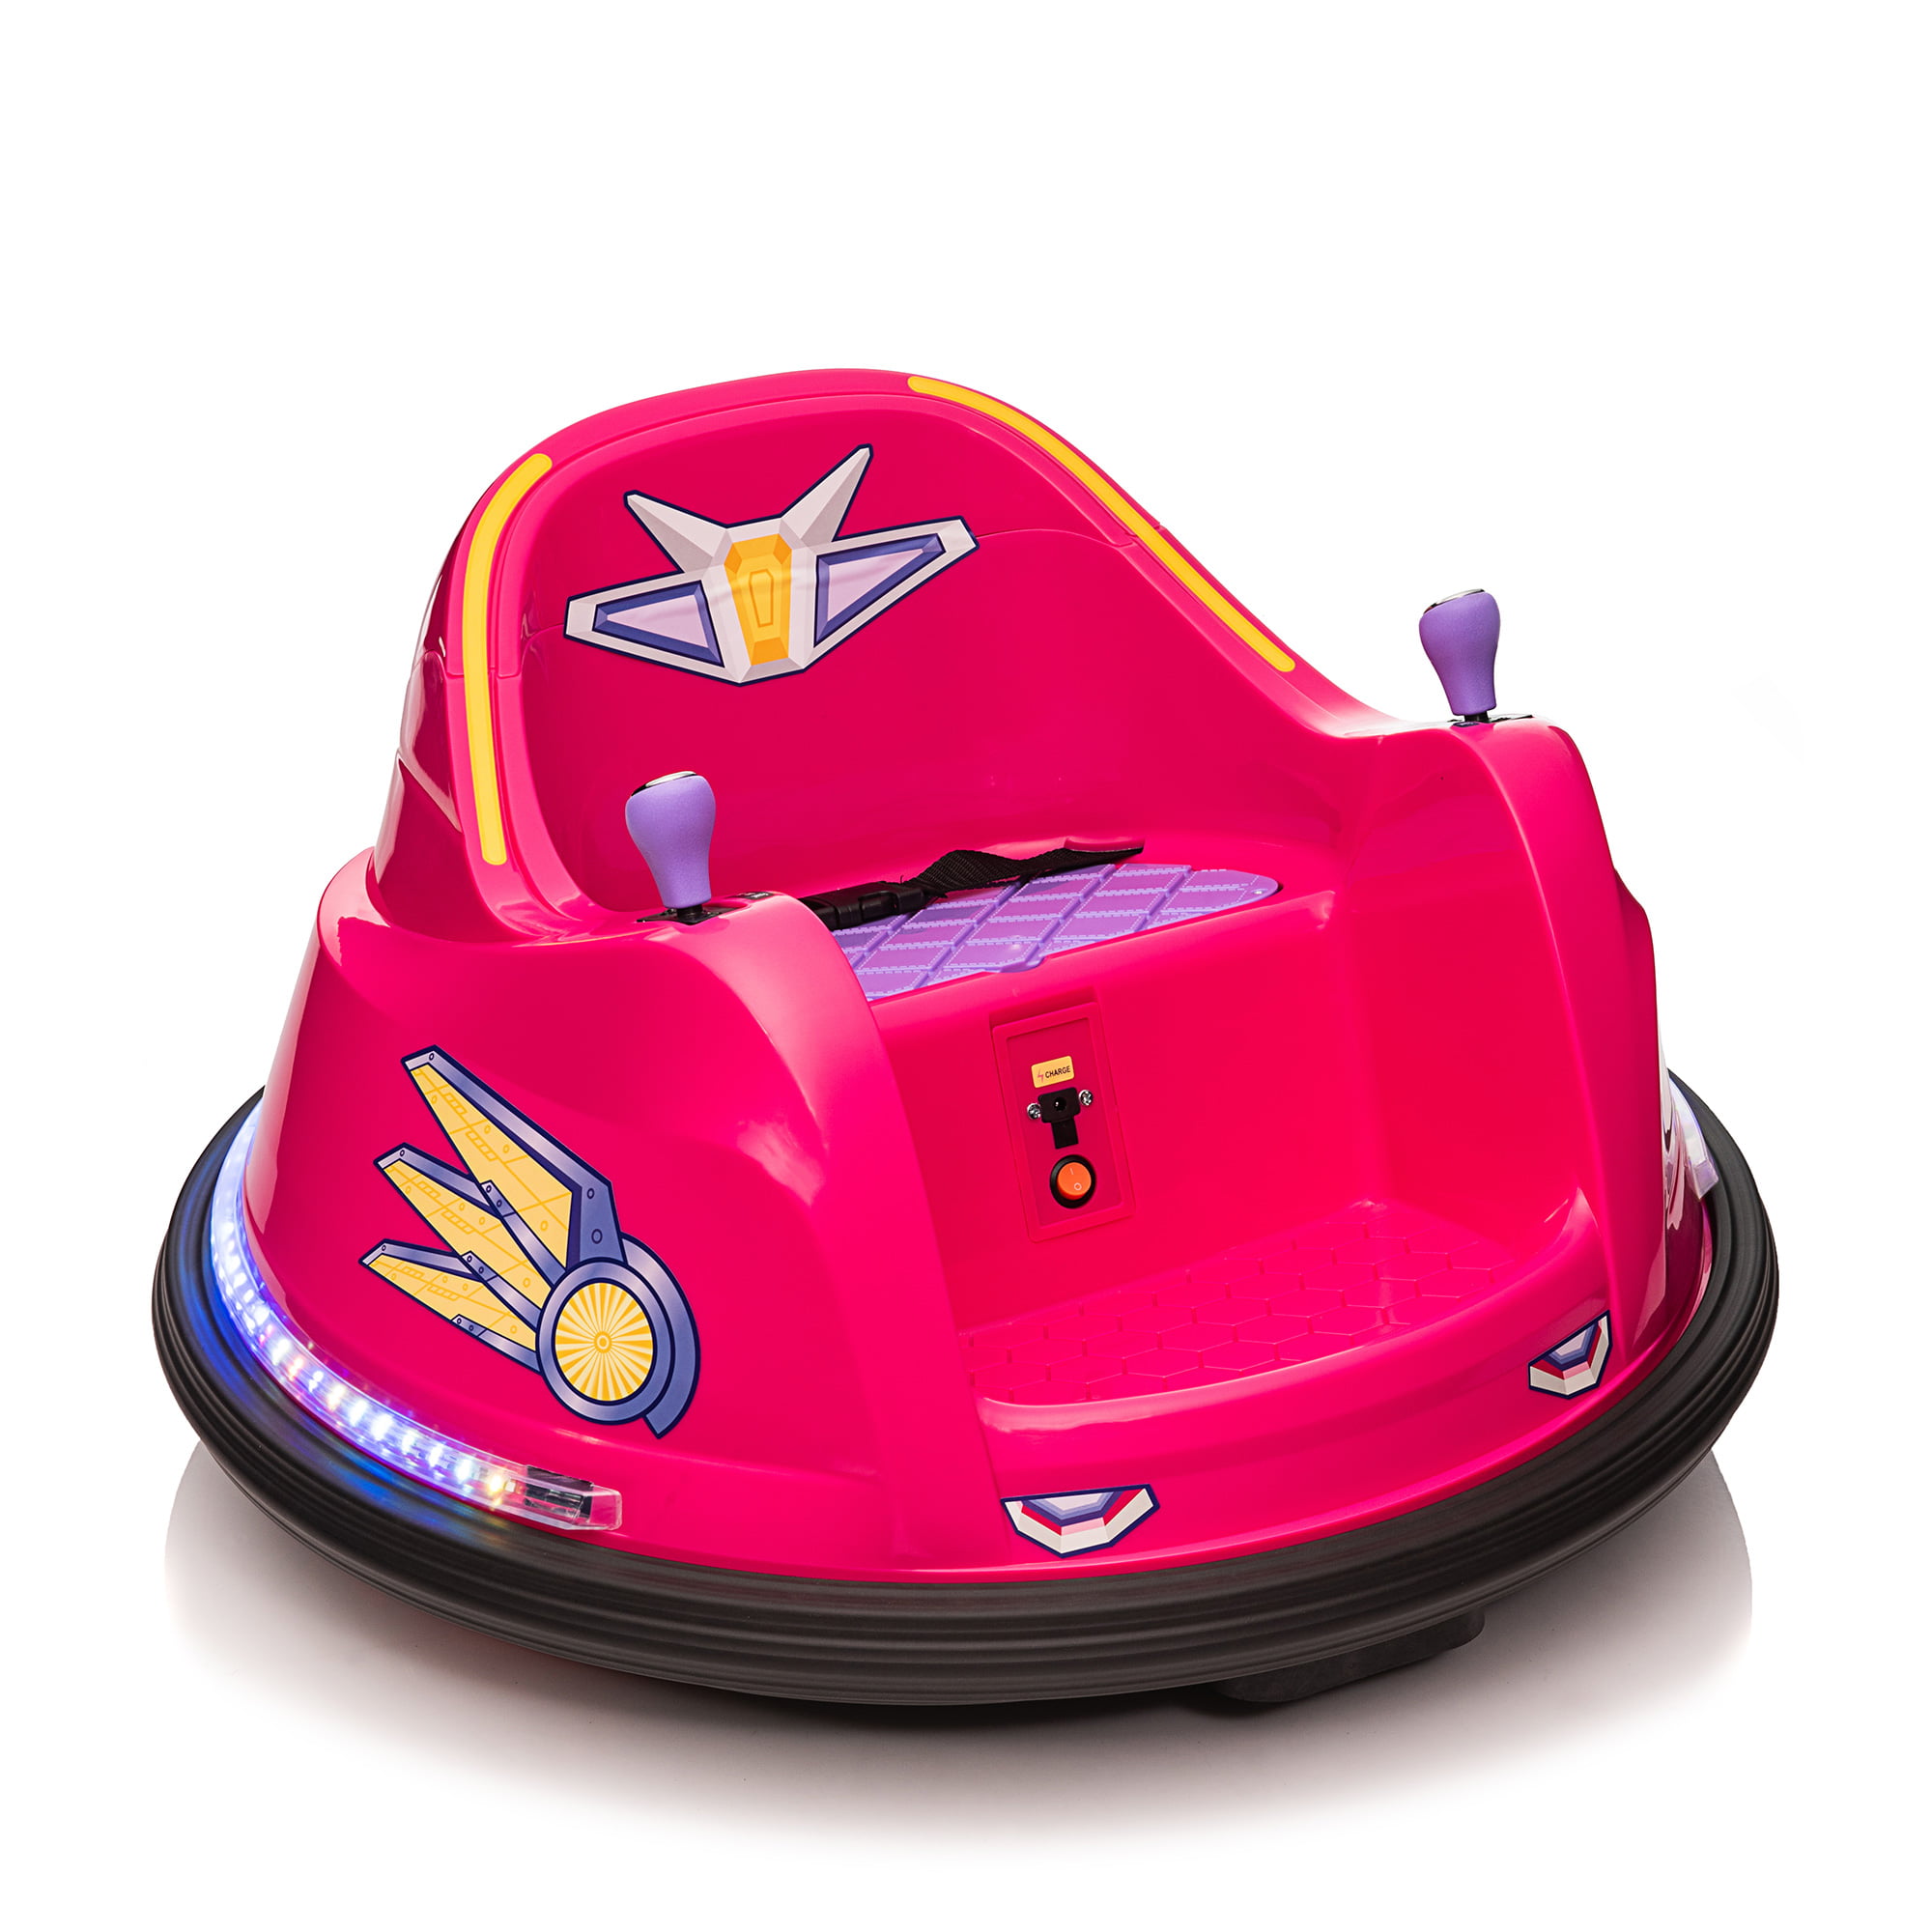 Details about   Ride On Bumper Car Toy For Toddlers 6V Battery-Powered With Light For Kids gift 